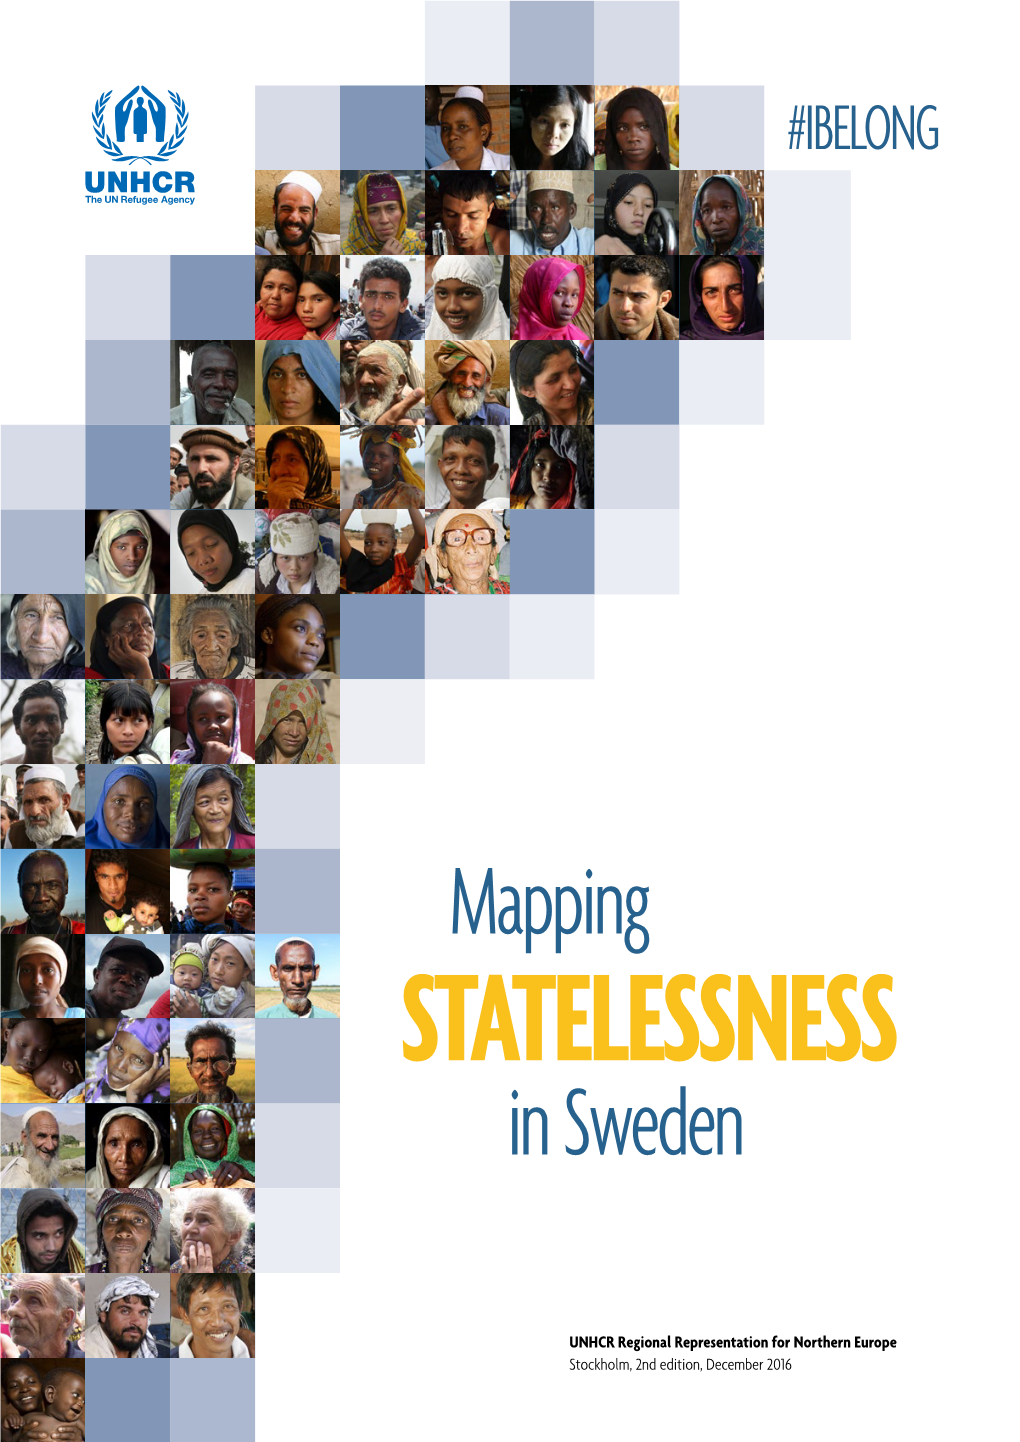 Mapping in Sweden Was Conducted by an Independent Consultant, Ms Anne Laakko, Working Under the Supervision of UNHCR RRNE